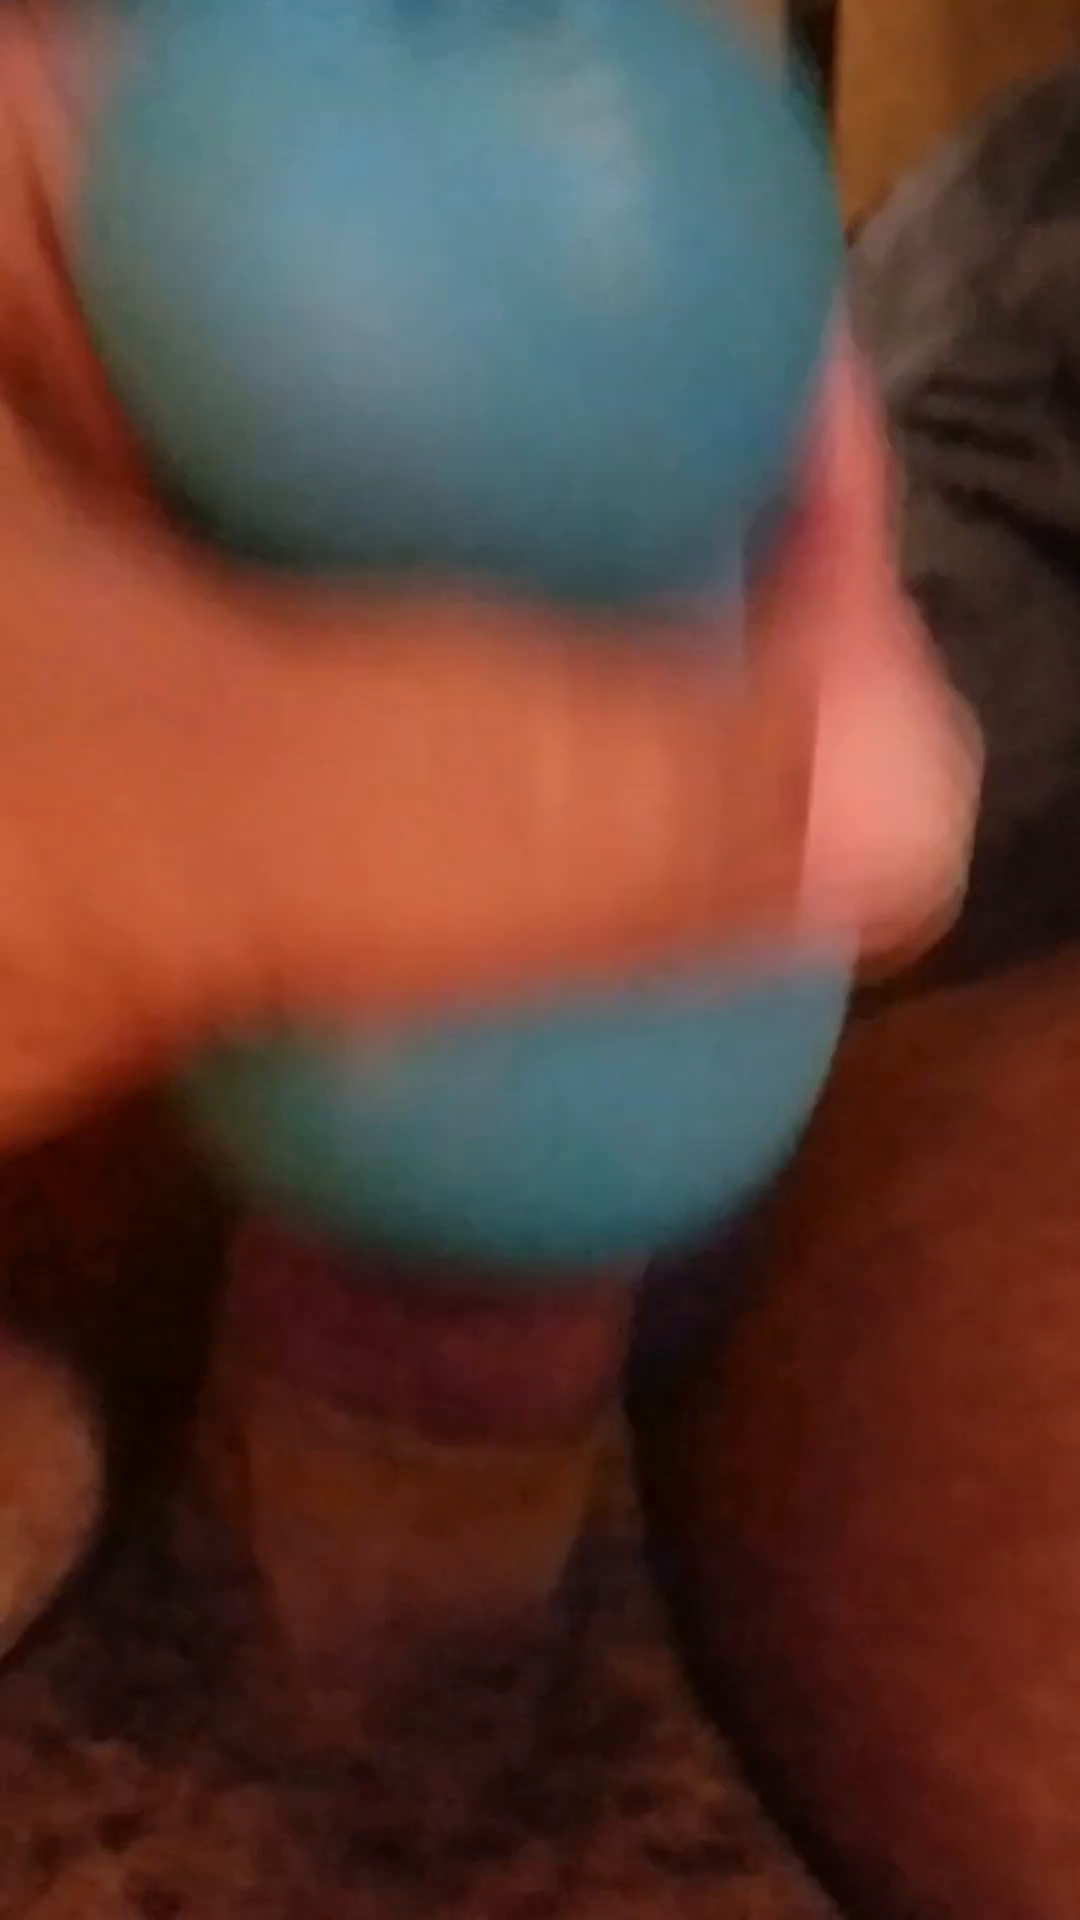 Watch the Video by Mike Hawke with the username @wunhunglow410, who is a verified user, posted on May 12, 2020 and the text says 'Me using my new stroker to jerk off'